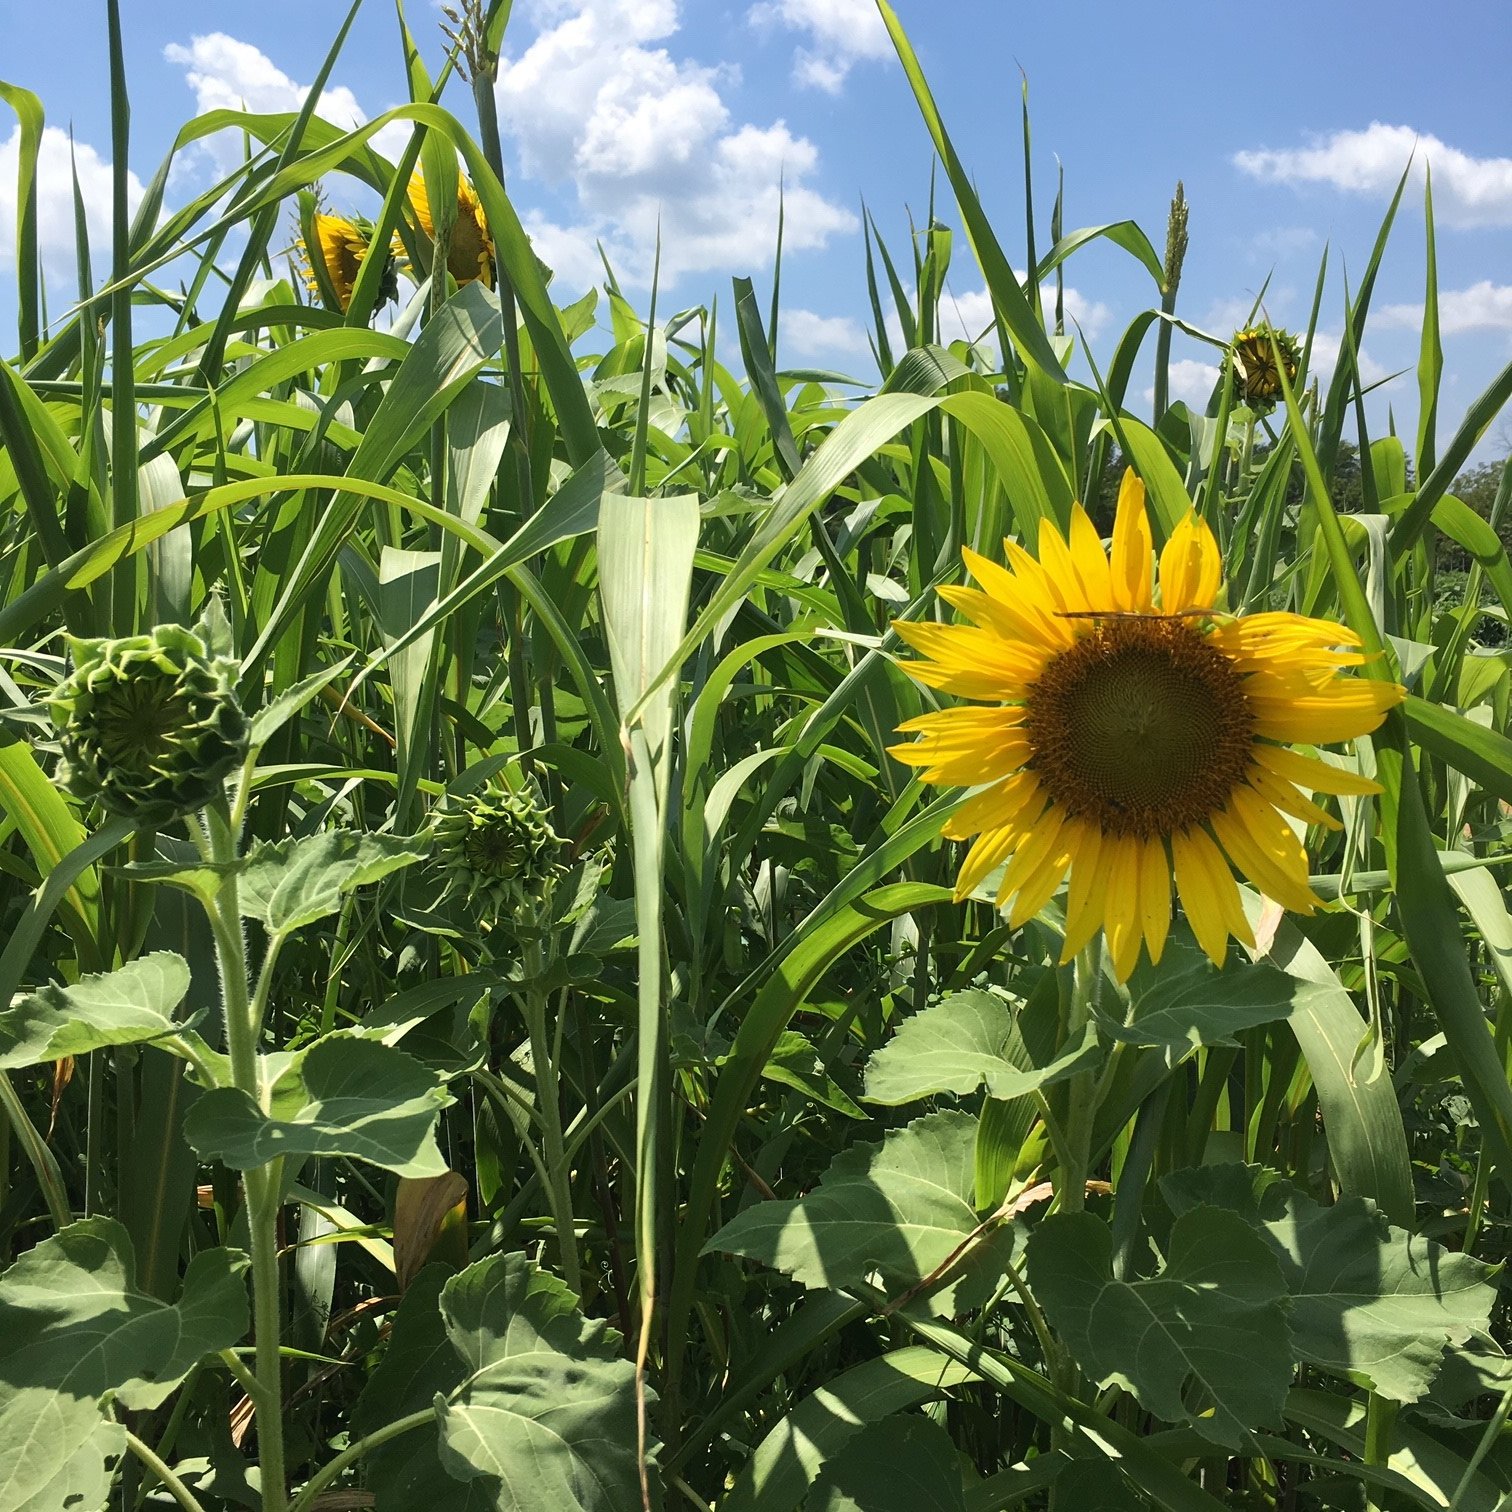 Uncovering Cover Crops